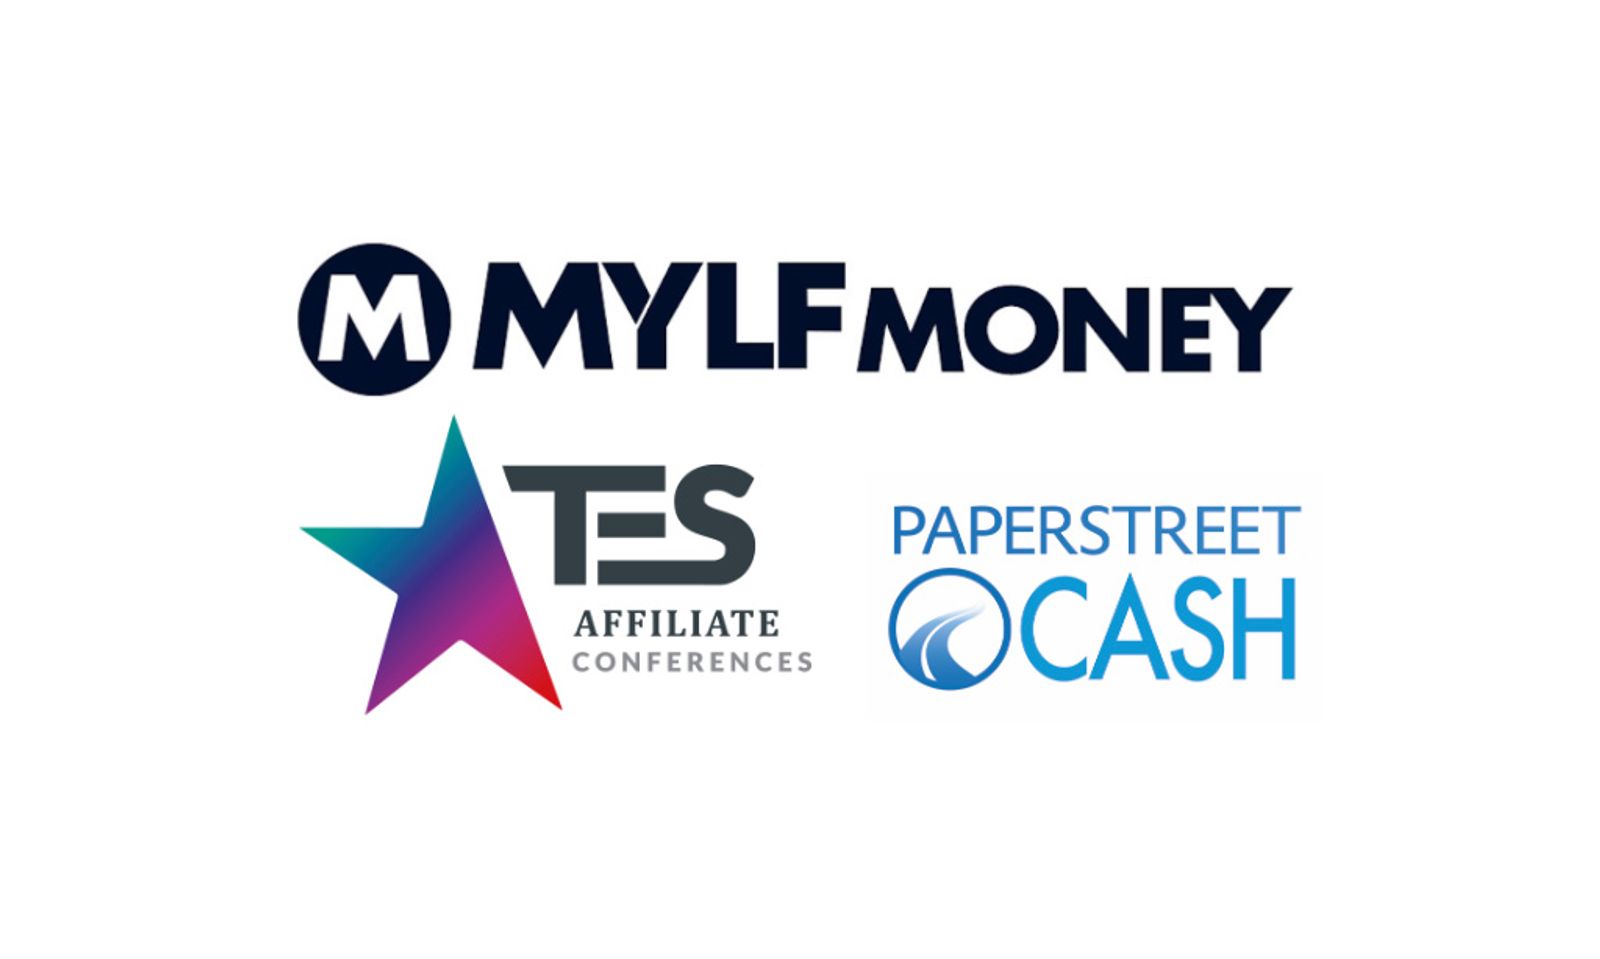 Paper Street Cash and MYLF Money Exec to Attend European Summit